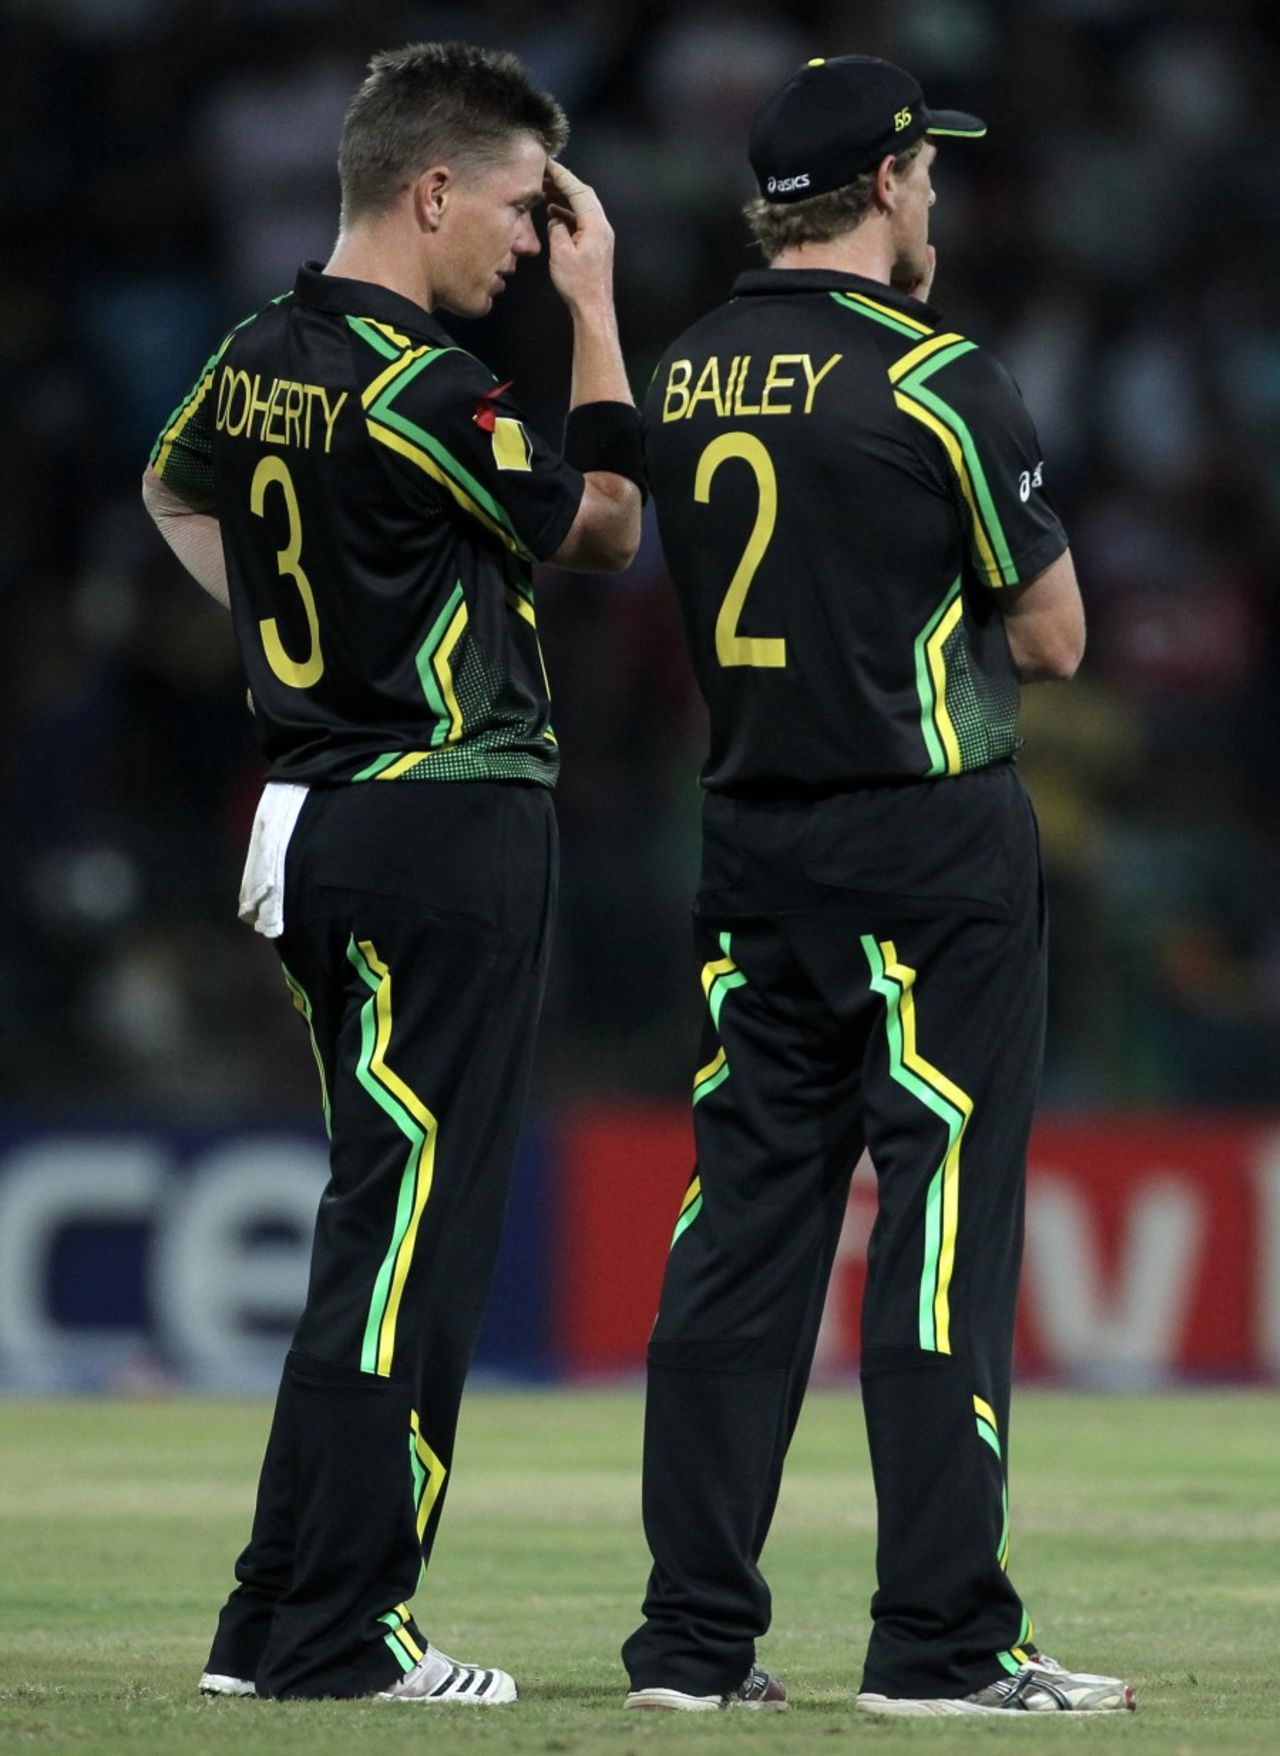 Xavier Doherty and George Bailey discuss their plans, Australia v West Indies, 2nd semi-final, World Twenty20 2012, Colombo, October 5, 2012